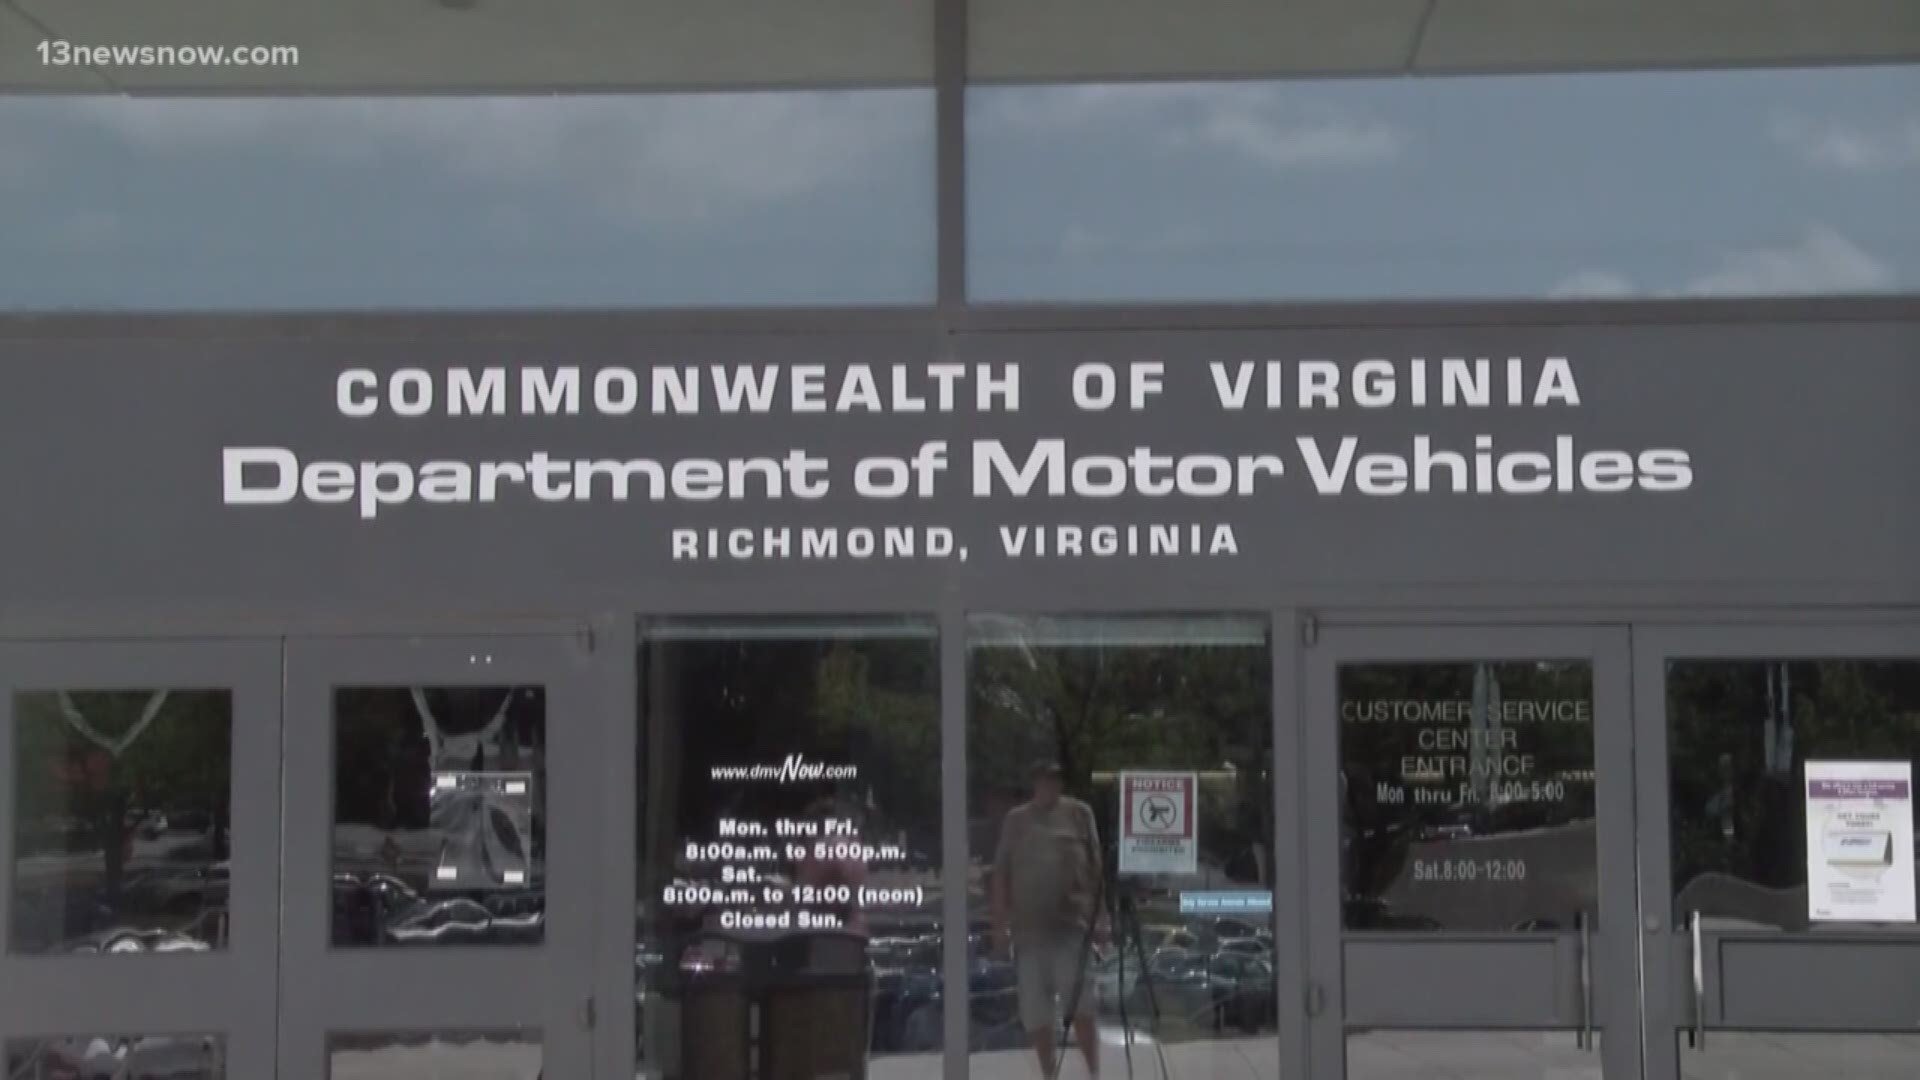 Norfolk residents are excited because they believe there will be better chances for jobs. Virginians can now have their licenses reinstated even if they still have unpaid court costs.